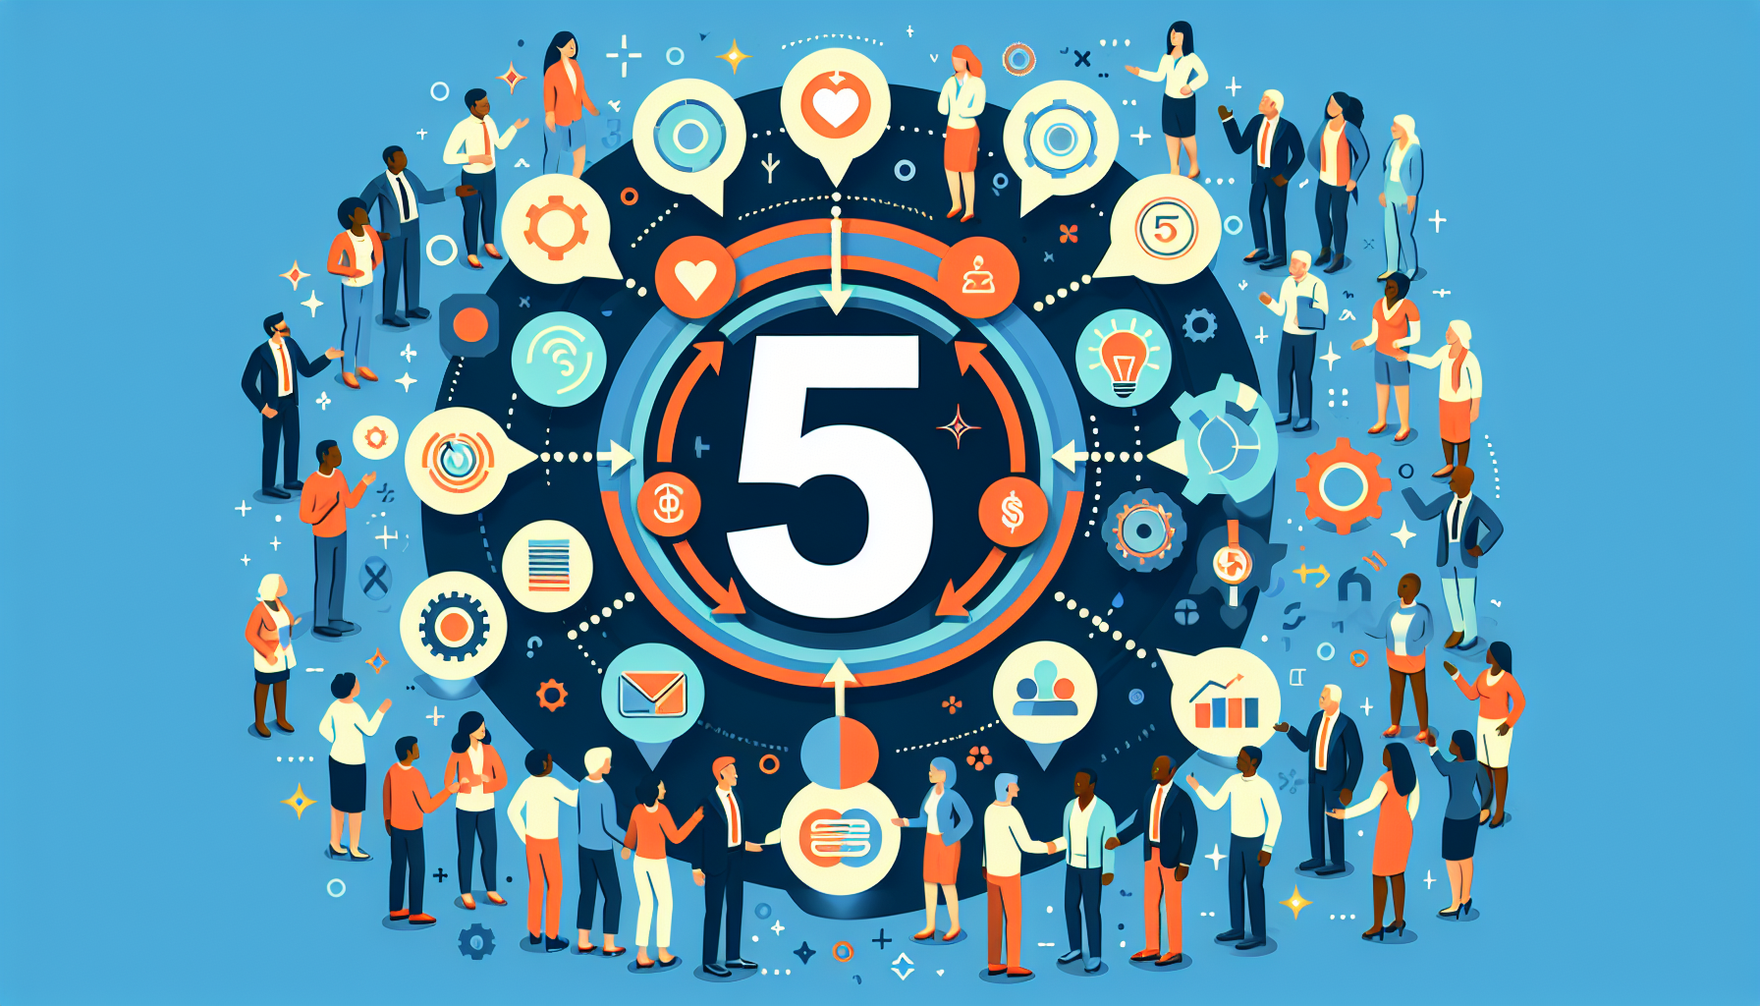 An image representing 5 essential tips for building strong customer connections. This image should feature a large '5' at the center, with arrows pointing to five distinct elements, symbolizing essent